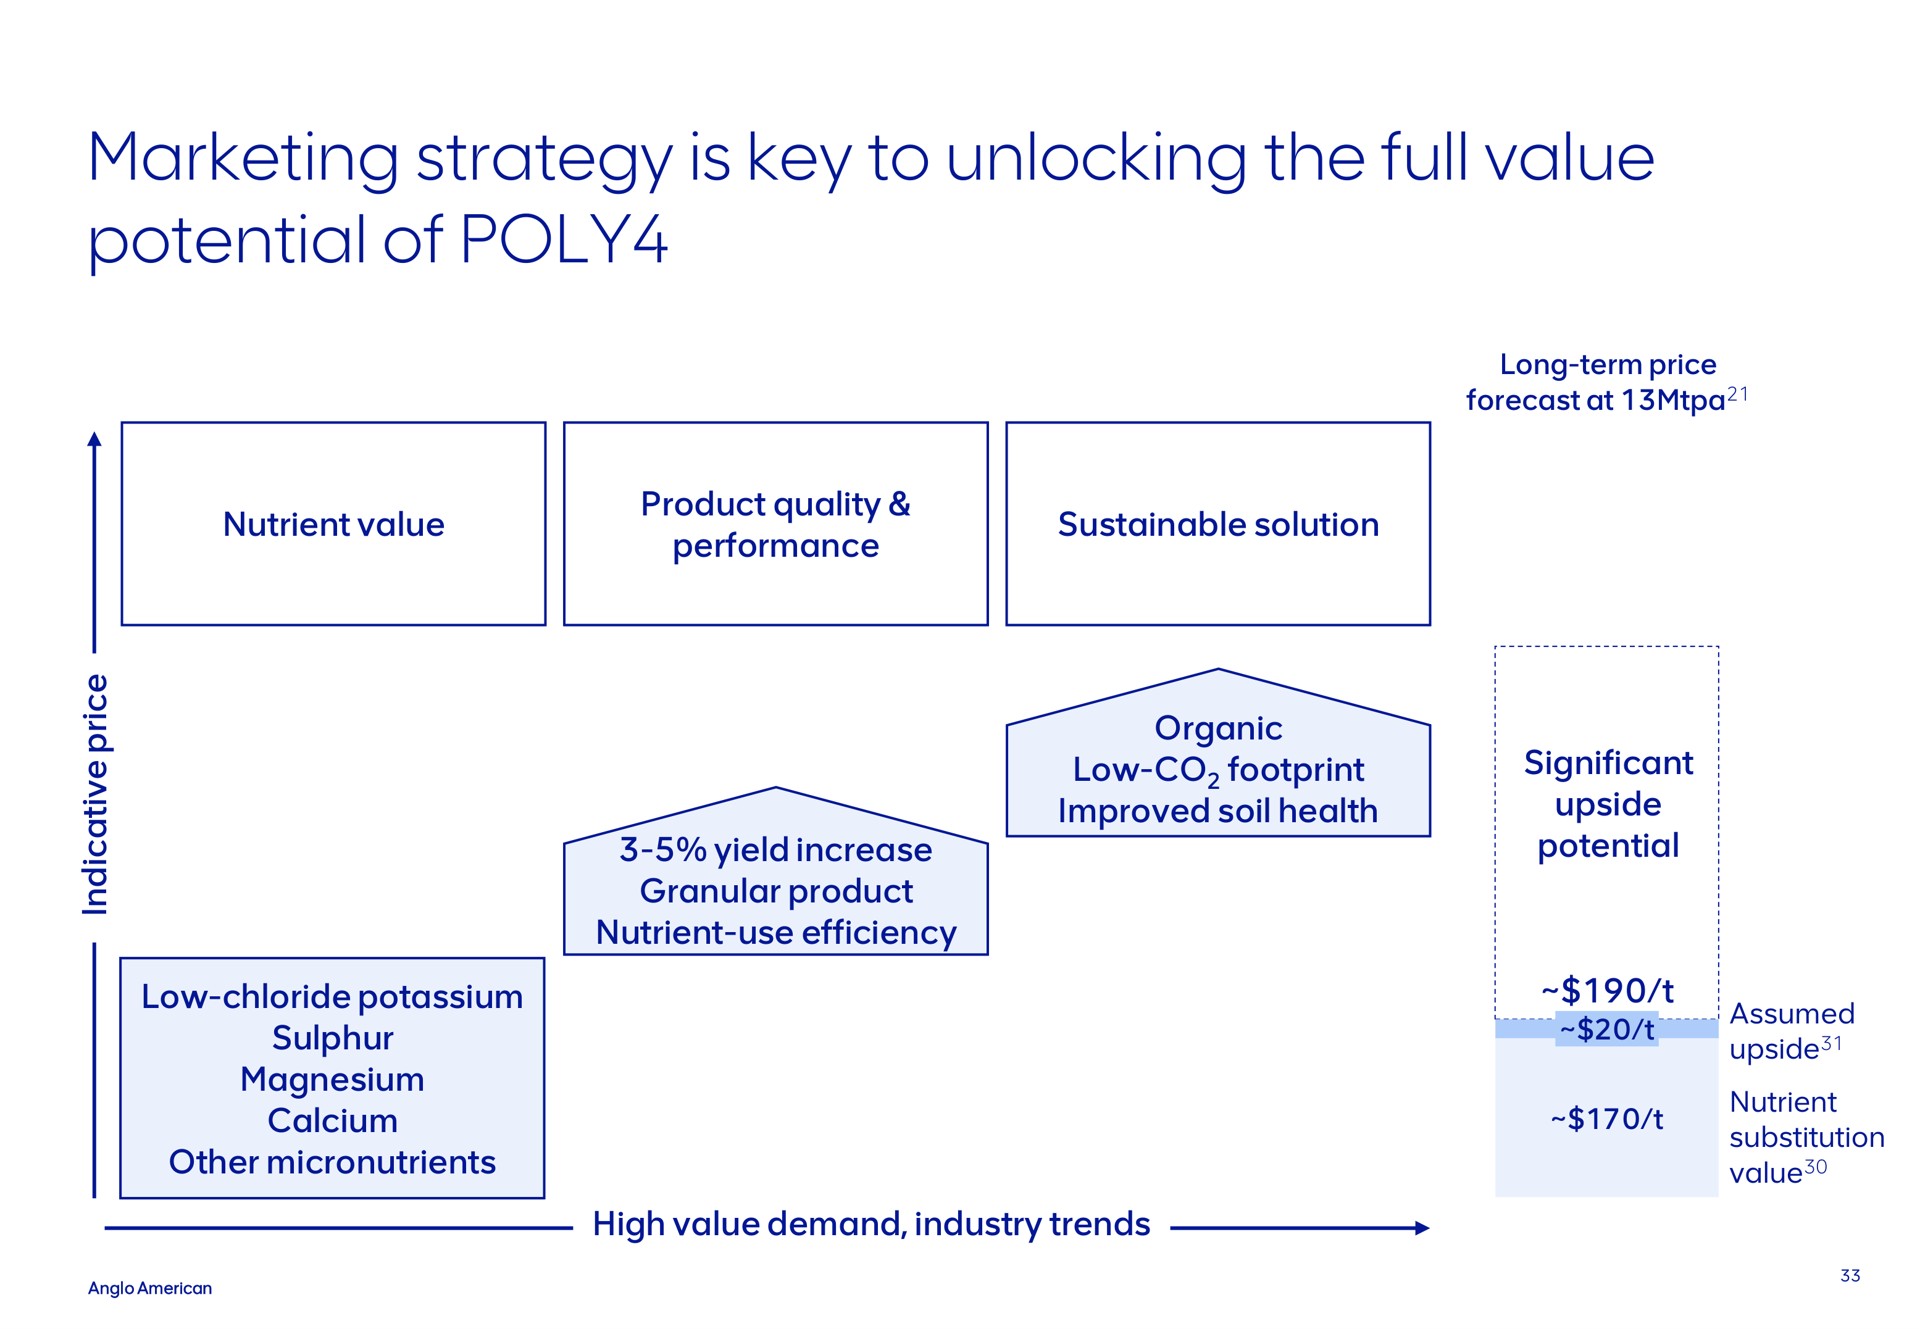 marketing strategy is key to unlocking the full value potential of poly | AngloAmerican